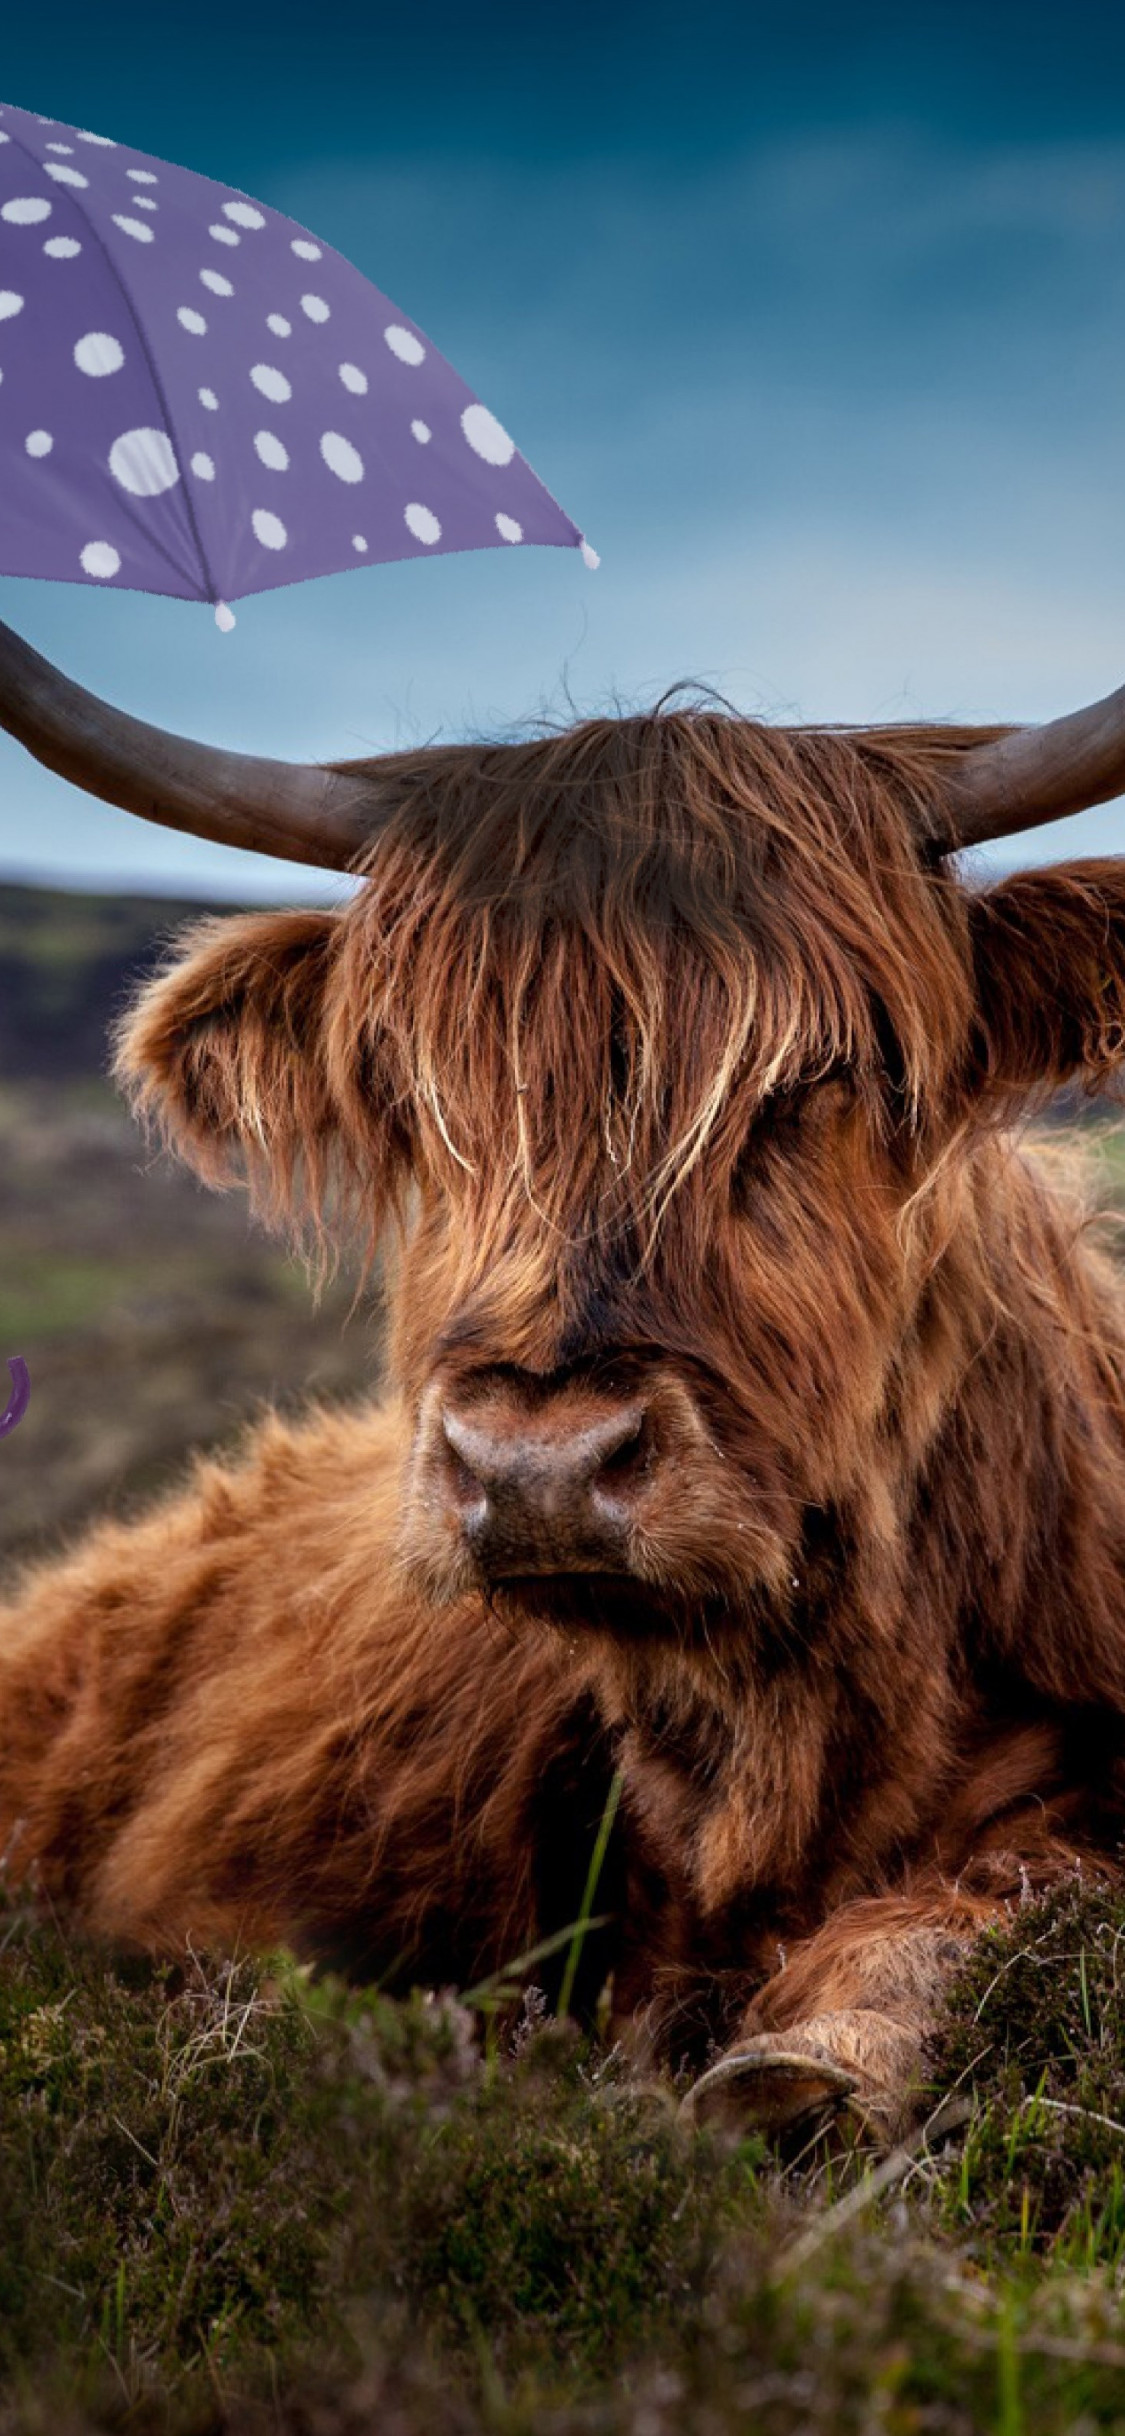 Child With The Umbrella And The Funny Cow - Highland Cow Art , HD Wallpaper & Backgrounds